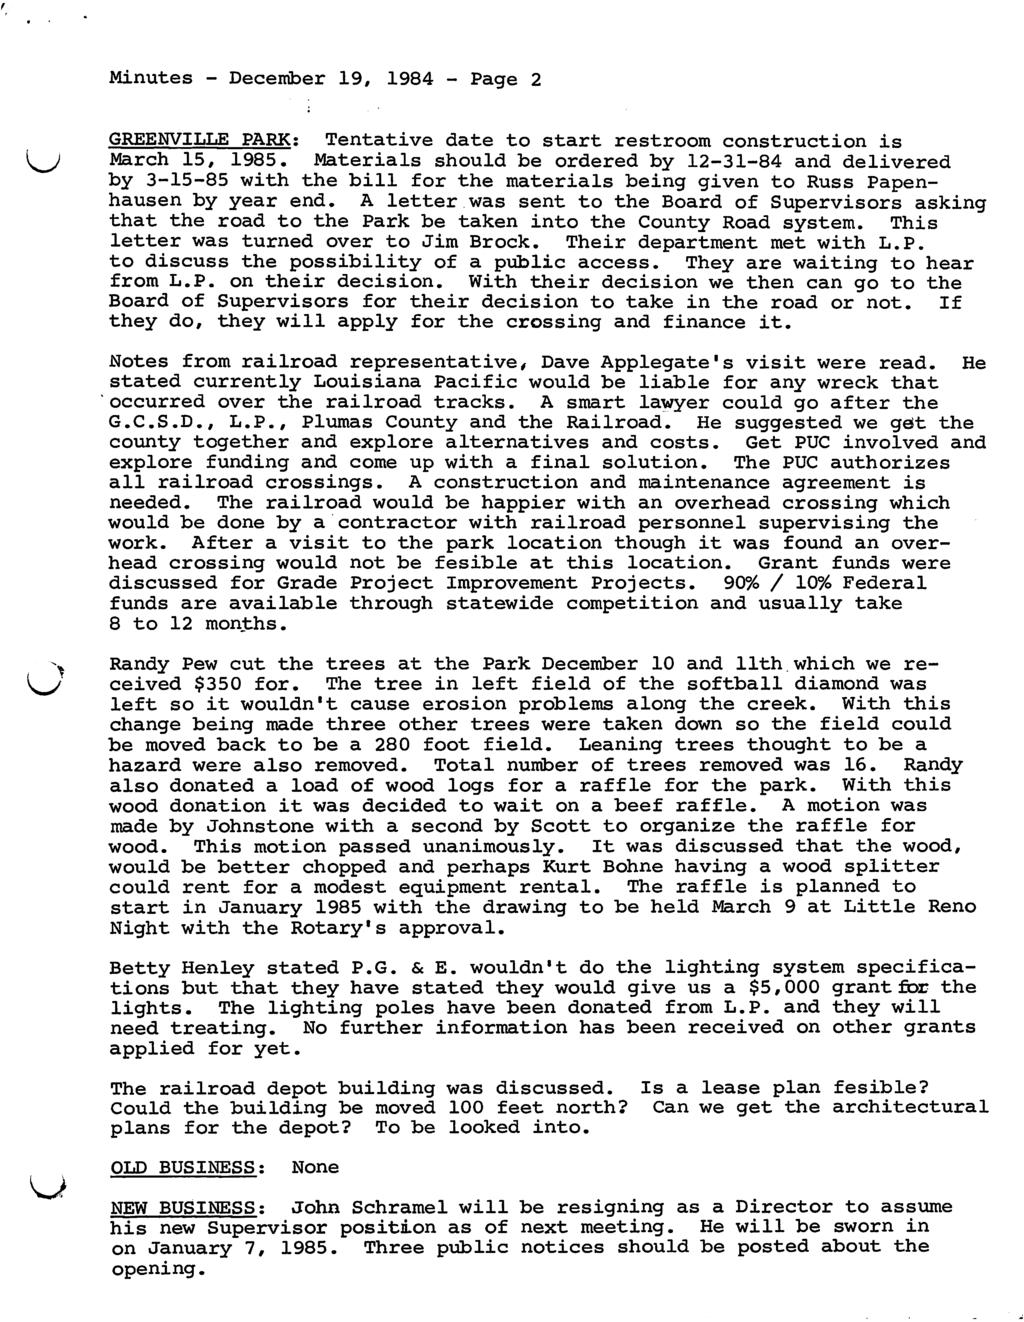 Mintes - December 19, 1984 - Page 2 GREENVILLE PARK: Tentative date to start restroom constrction is March 15, 1985.